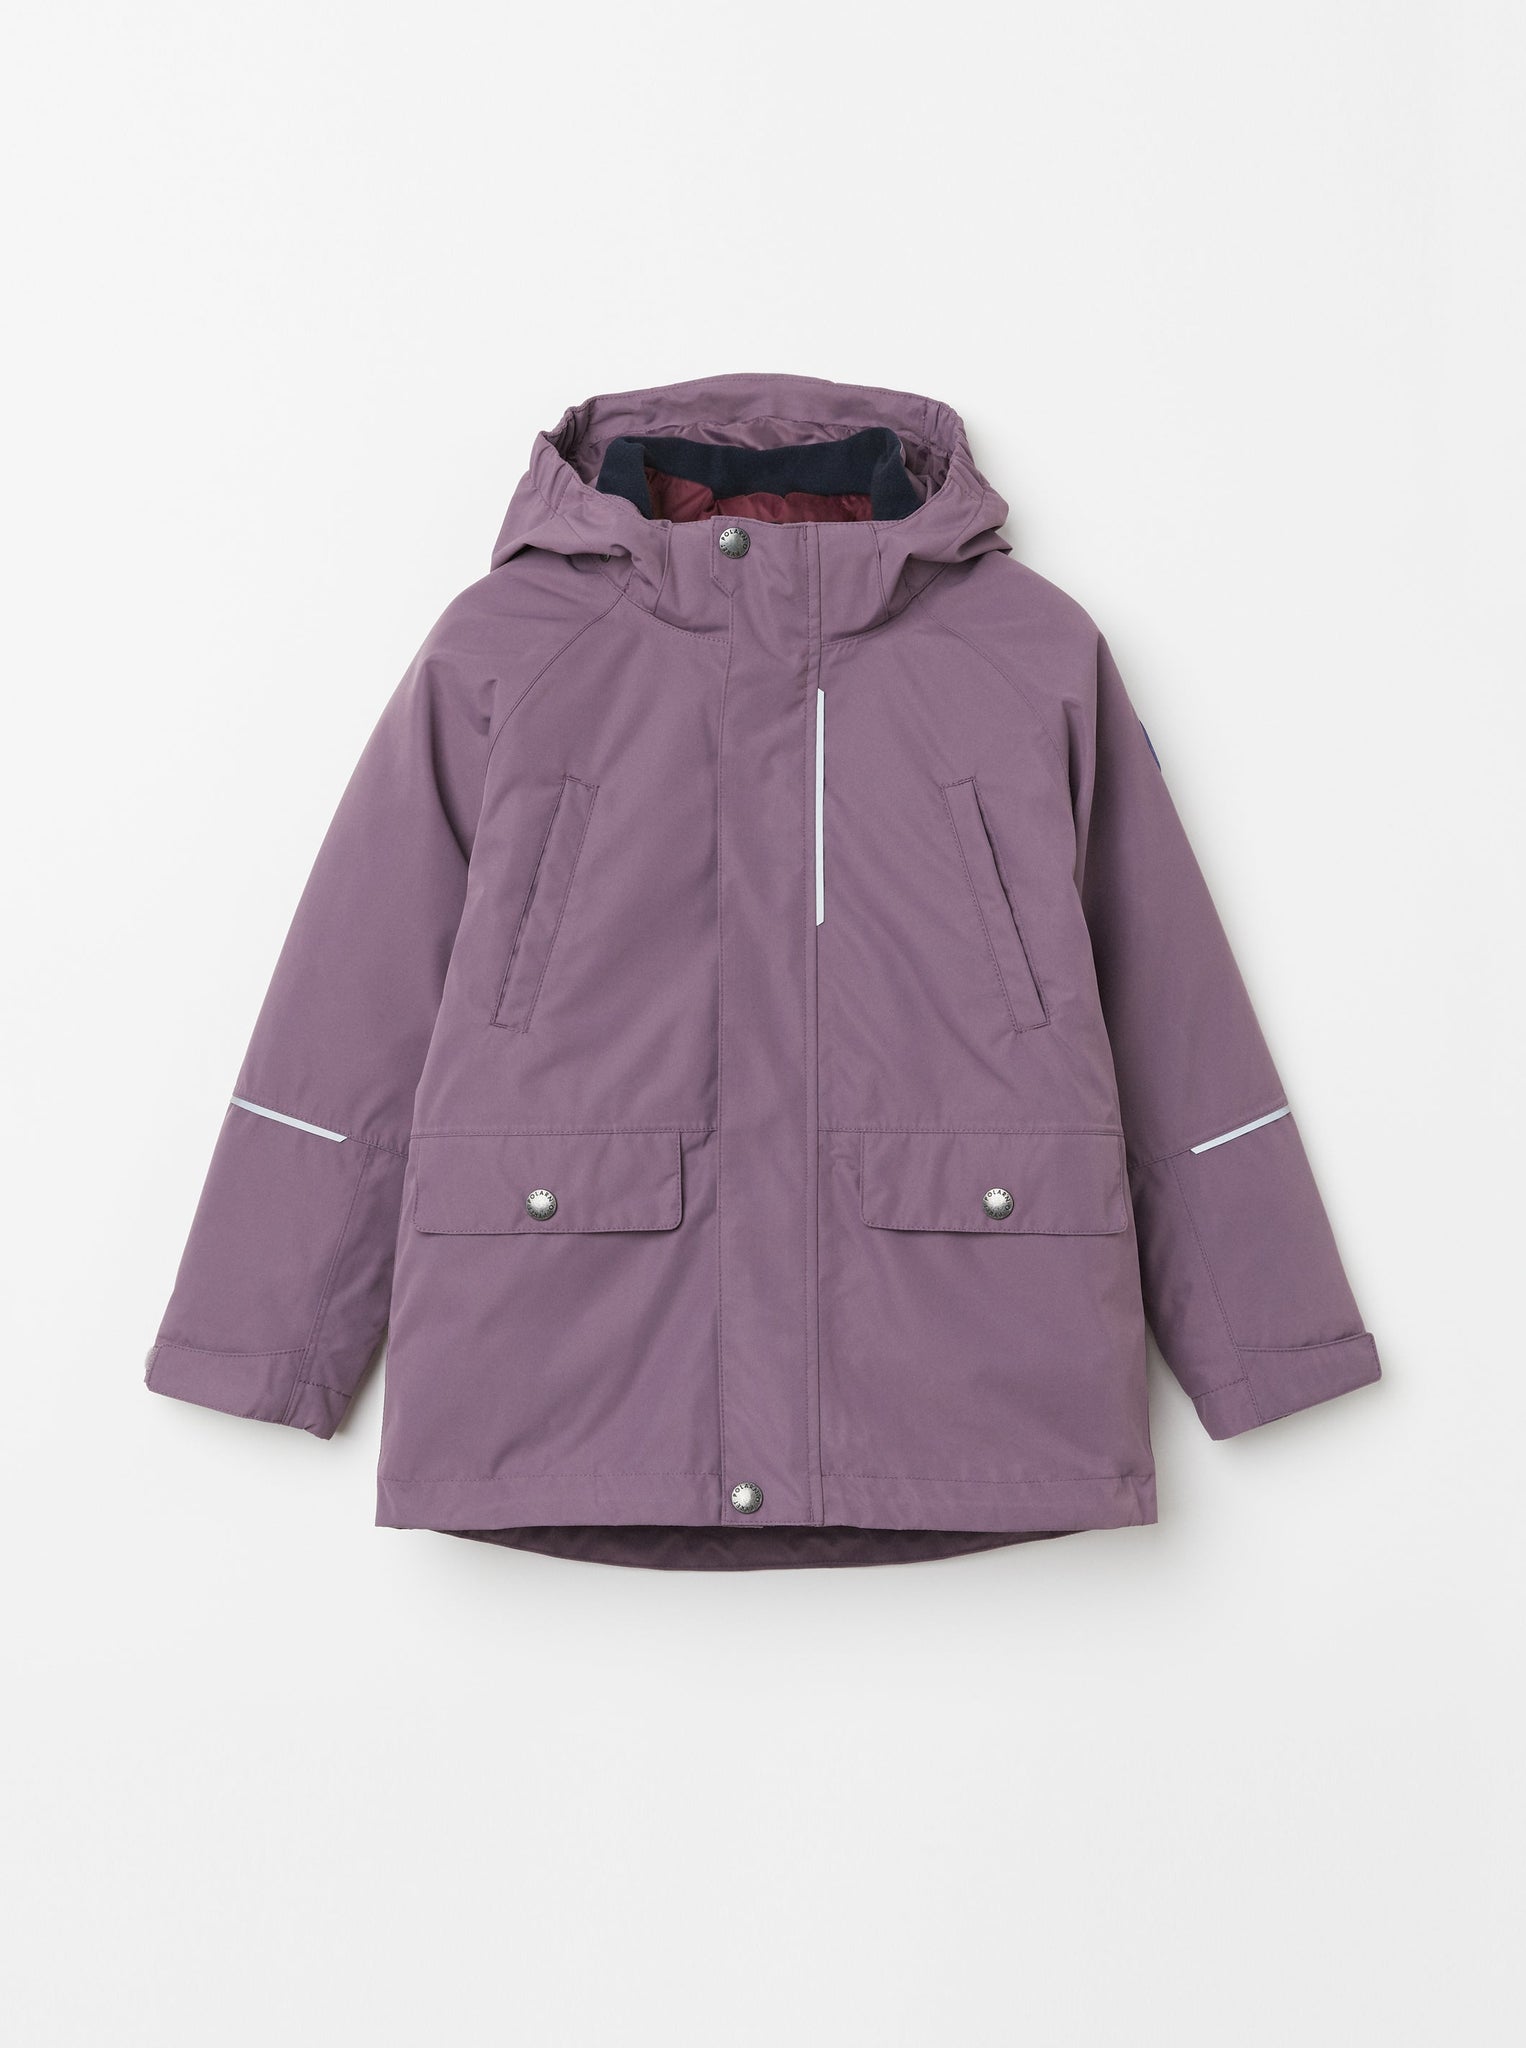 Purple 3-In-1 Kids Coat from the Polarn O. Pyret kidswear collection. Sustainably produced kids outerwear.